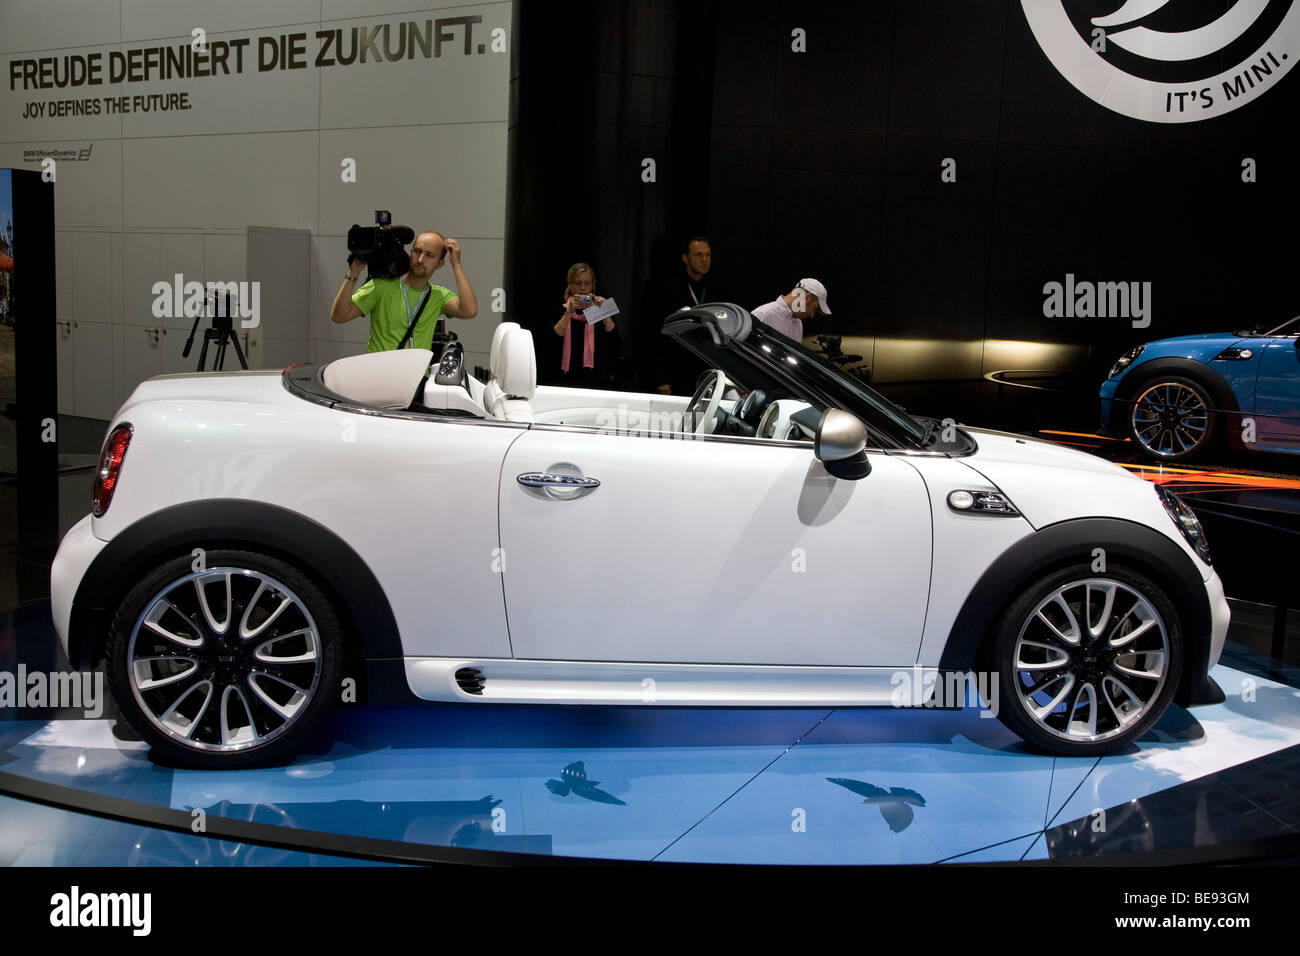 BMW Mini concept Roadster at a European motor show. Stock Photo